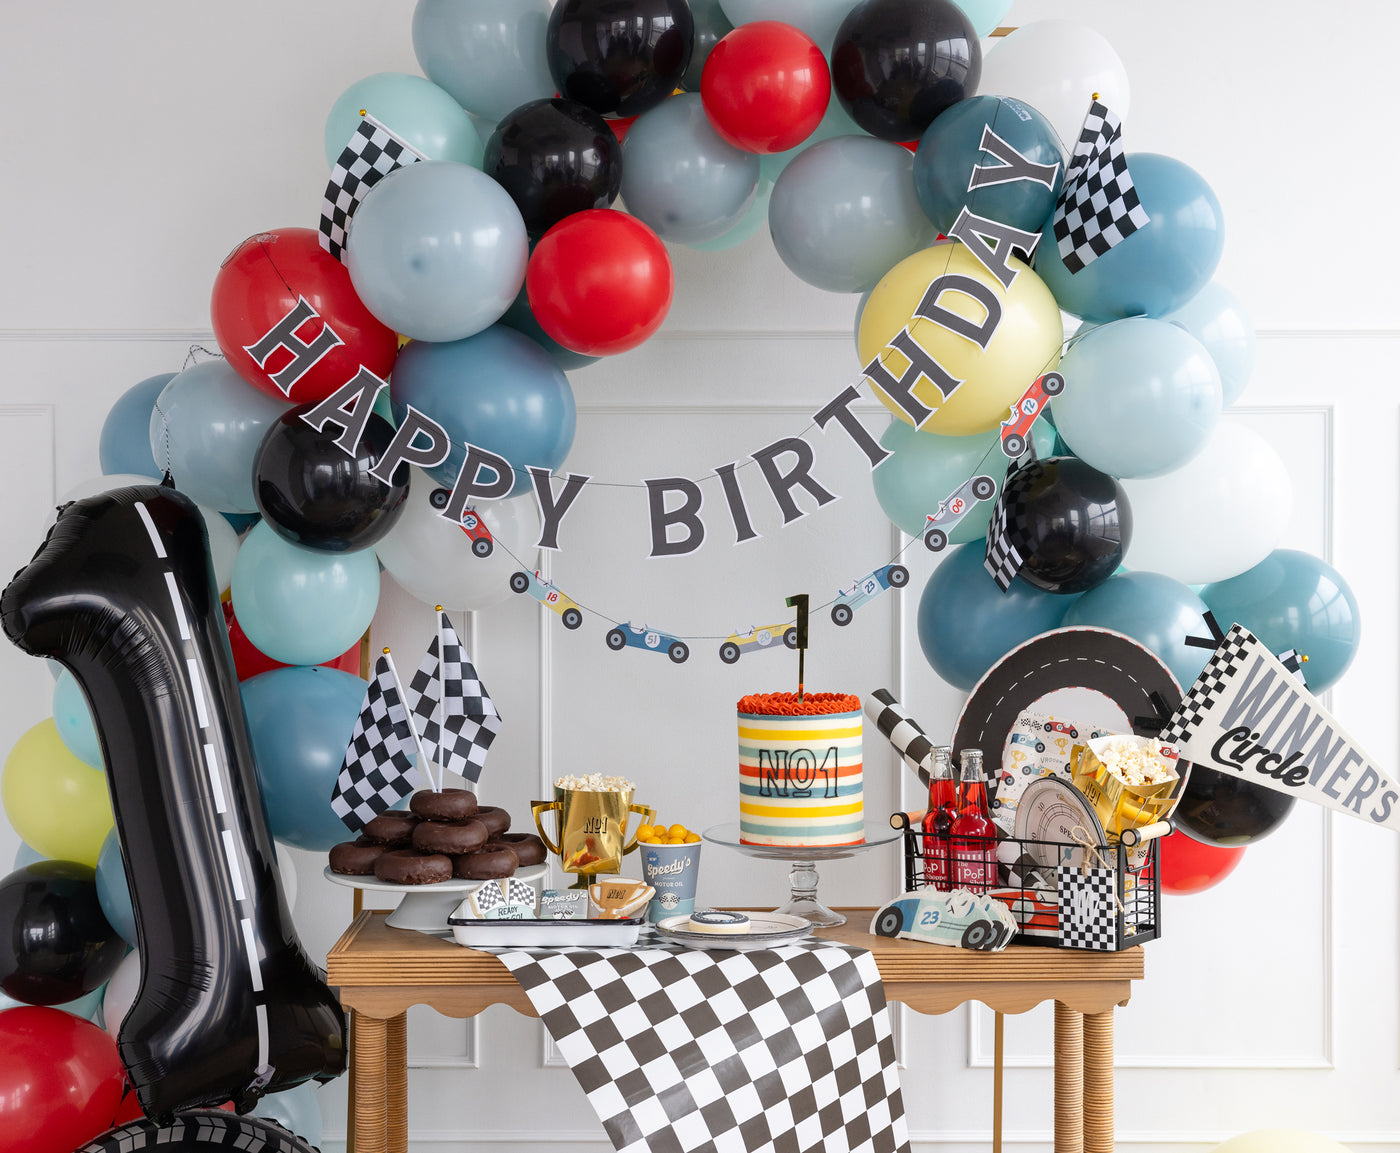 Racecar Happy Birthday banner with checkered flags